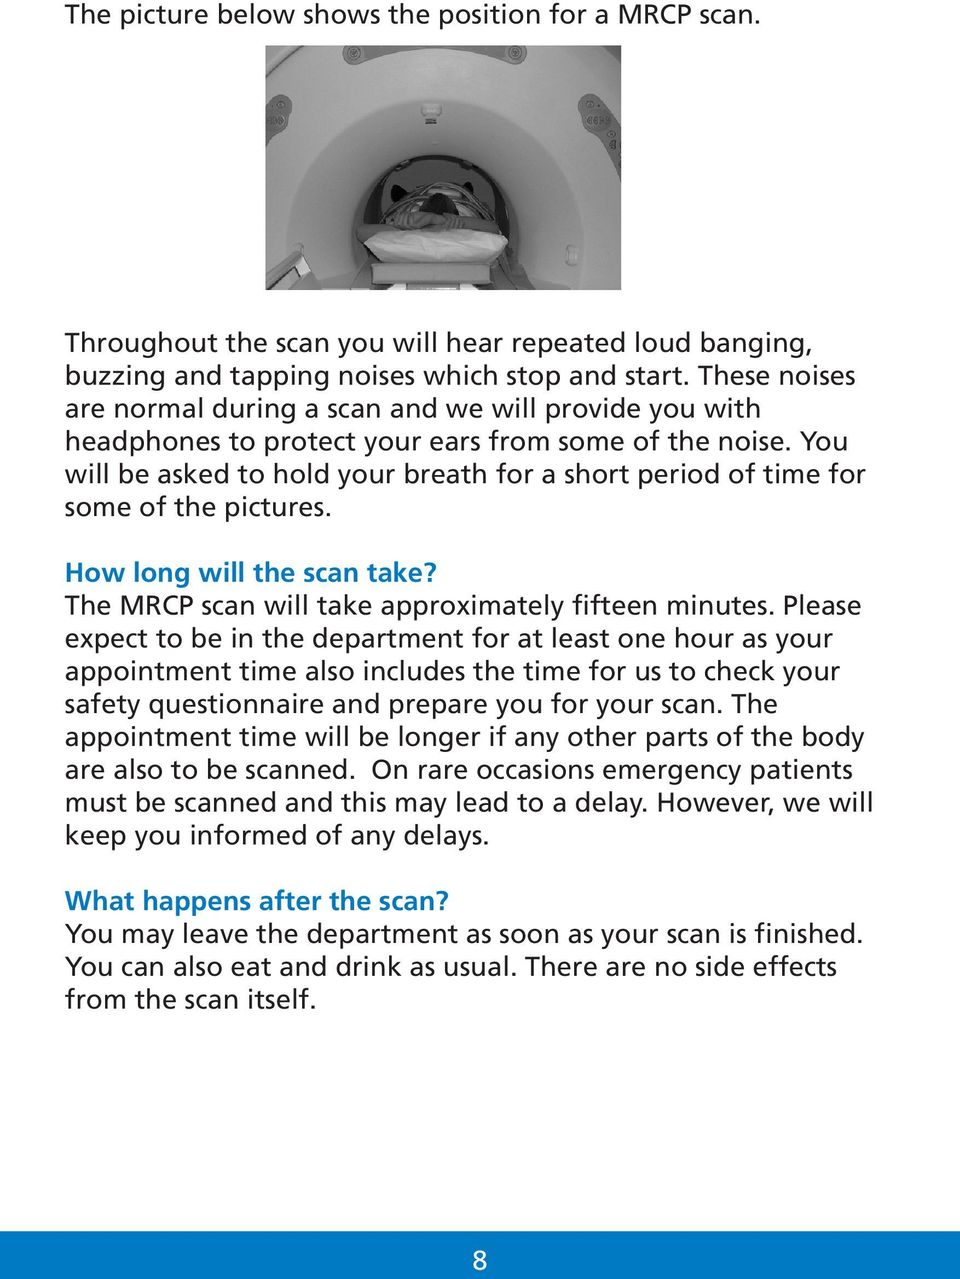 You will be asked to hold your breath for a short period of time for some of the pictures. How long will the scan take? The MRCP scan will take approximately fifteen minutes.